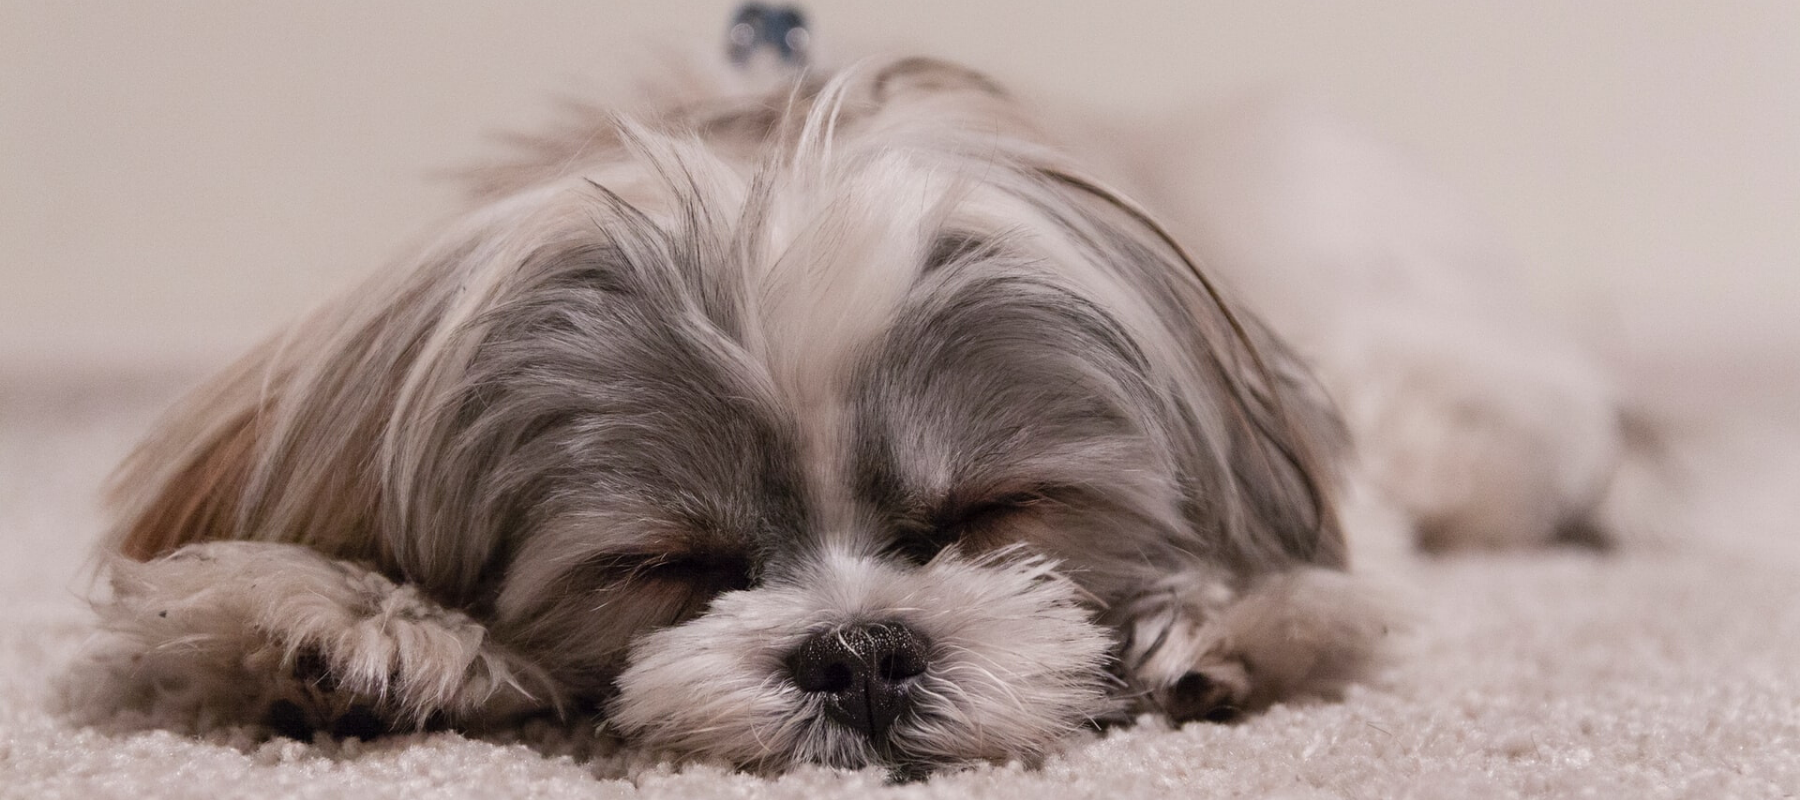 The Importance of Sleep for Dogs  image